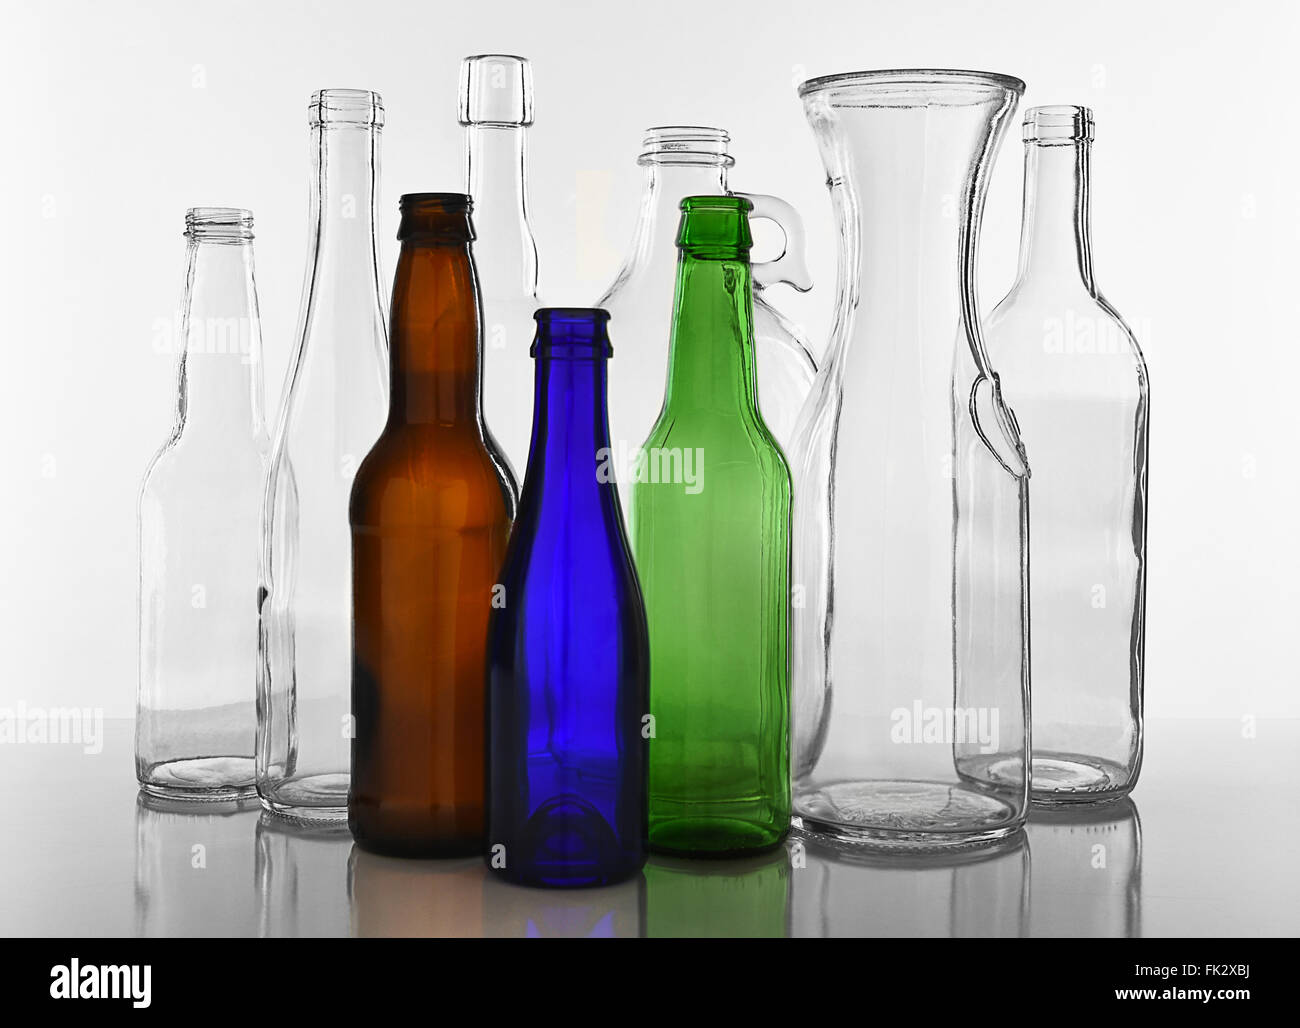 Empty Glass bottles on white with reflection. Clear glass and colored bottles. Stock Photo